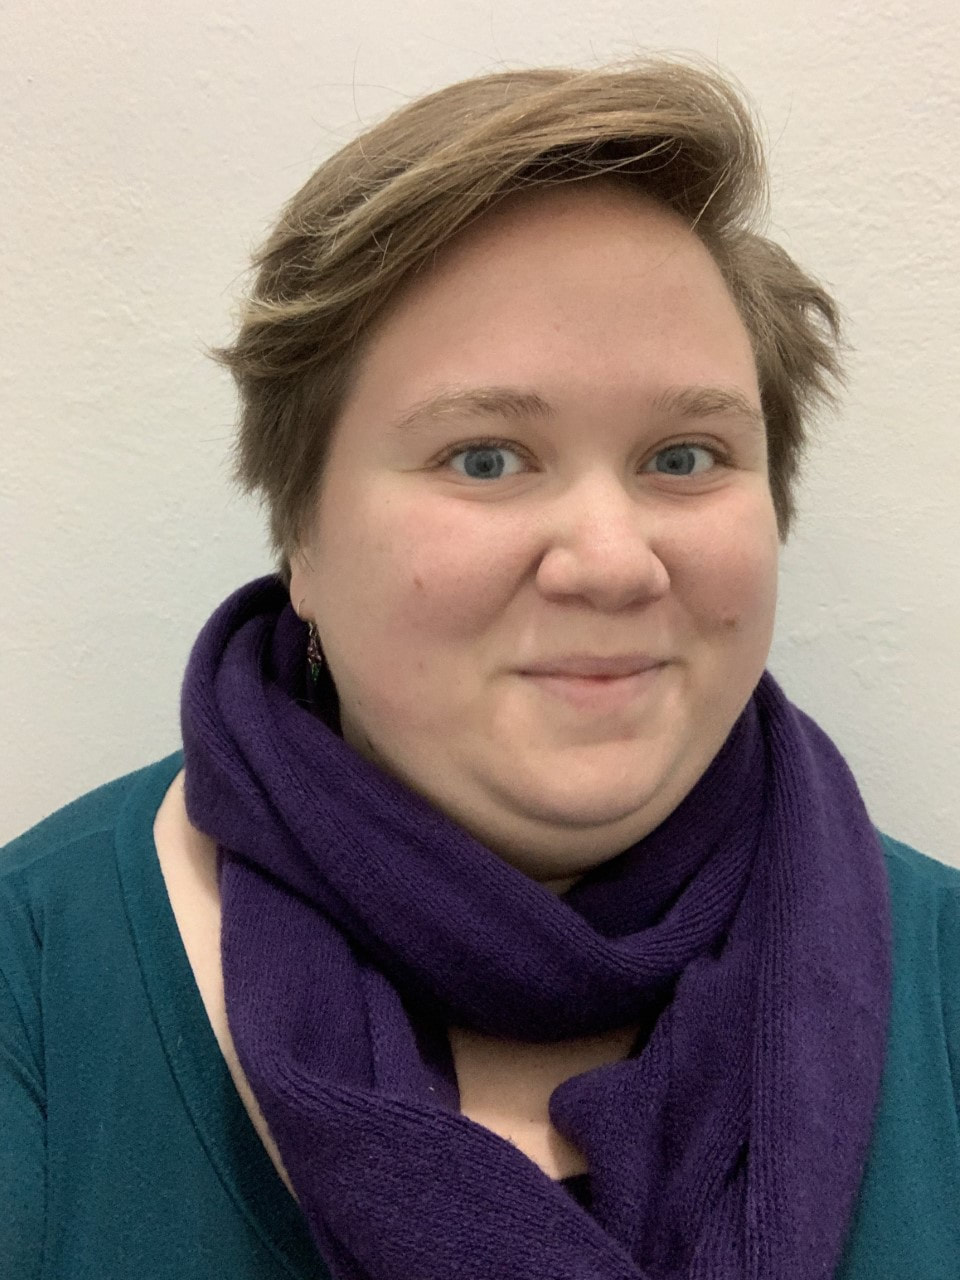 Azaleah, a white cisgender woman with short brown hair, wearing a purple scarf and a teal shirt, smiles confidently at the camera.